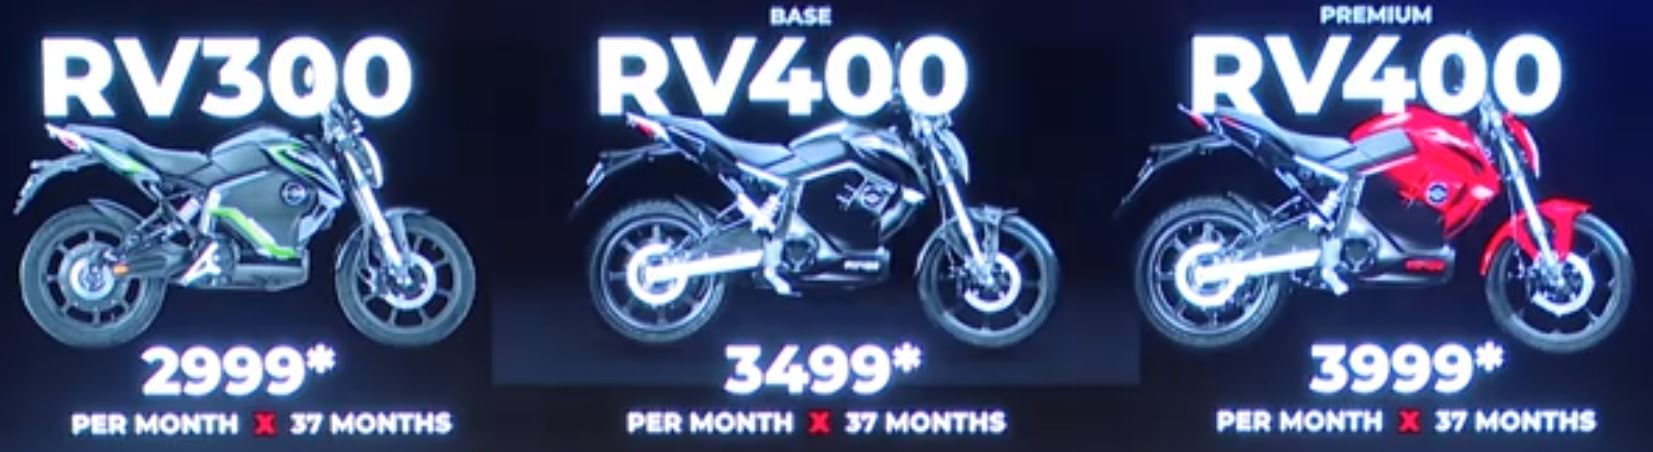 Revolt Electric Motorcycles Officially Launched